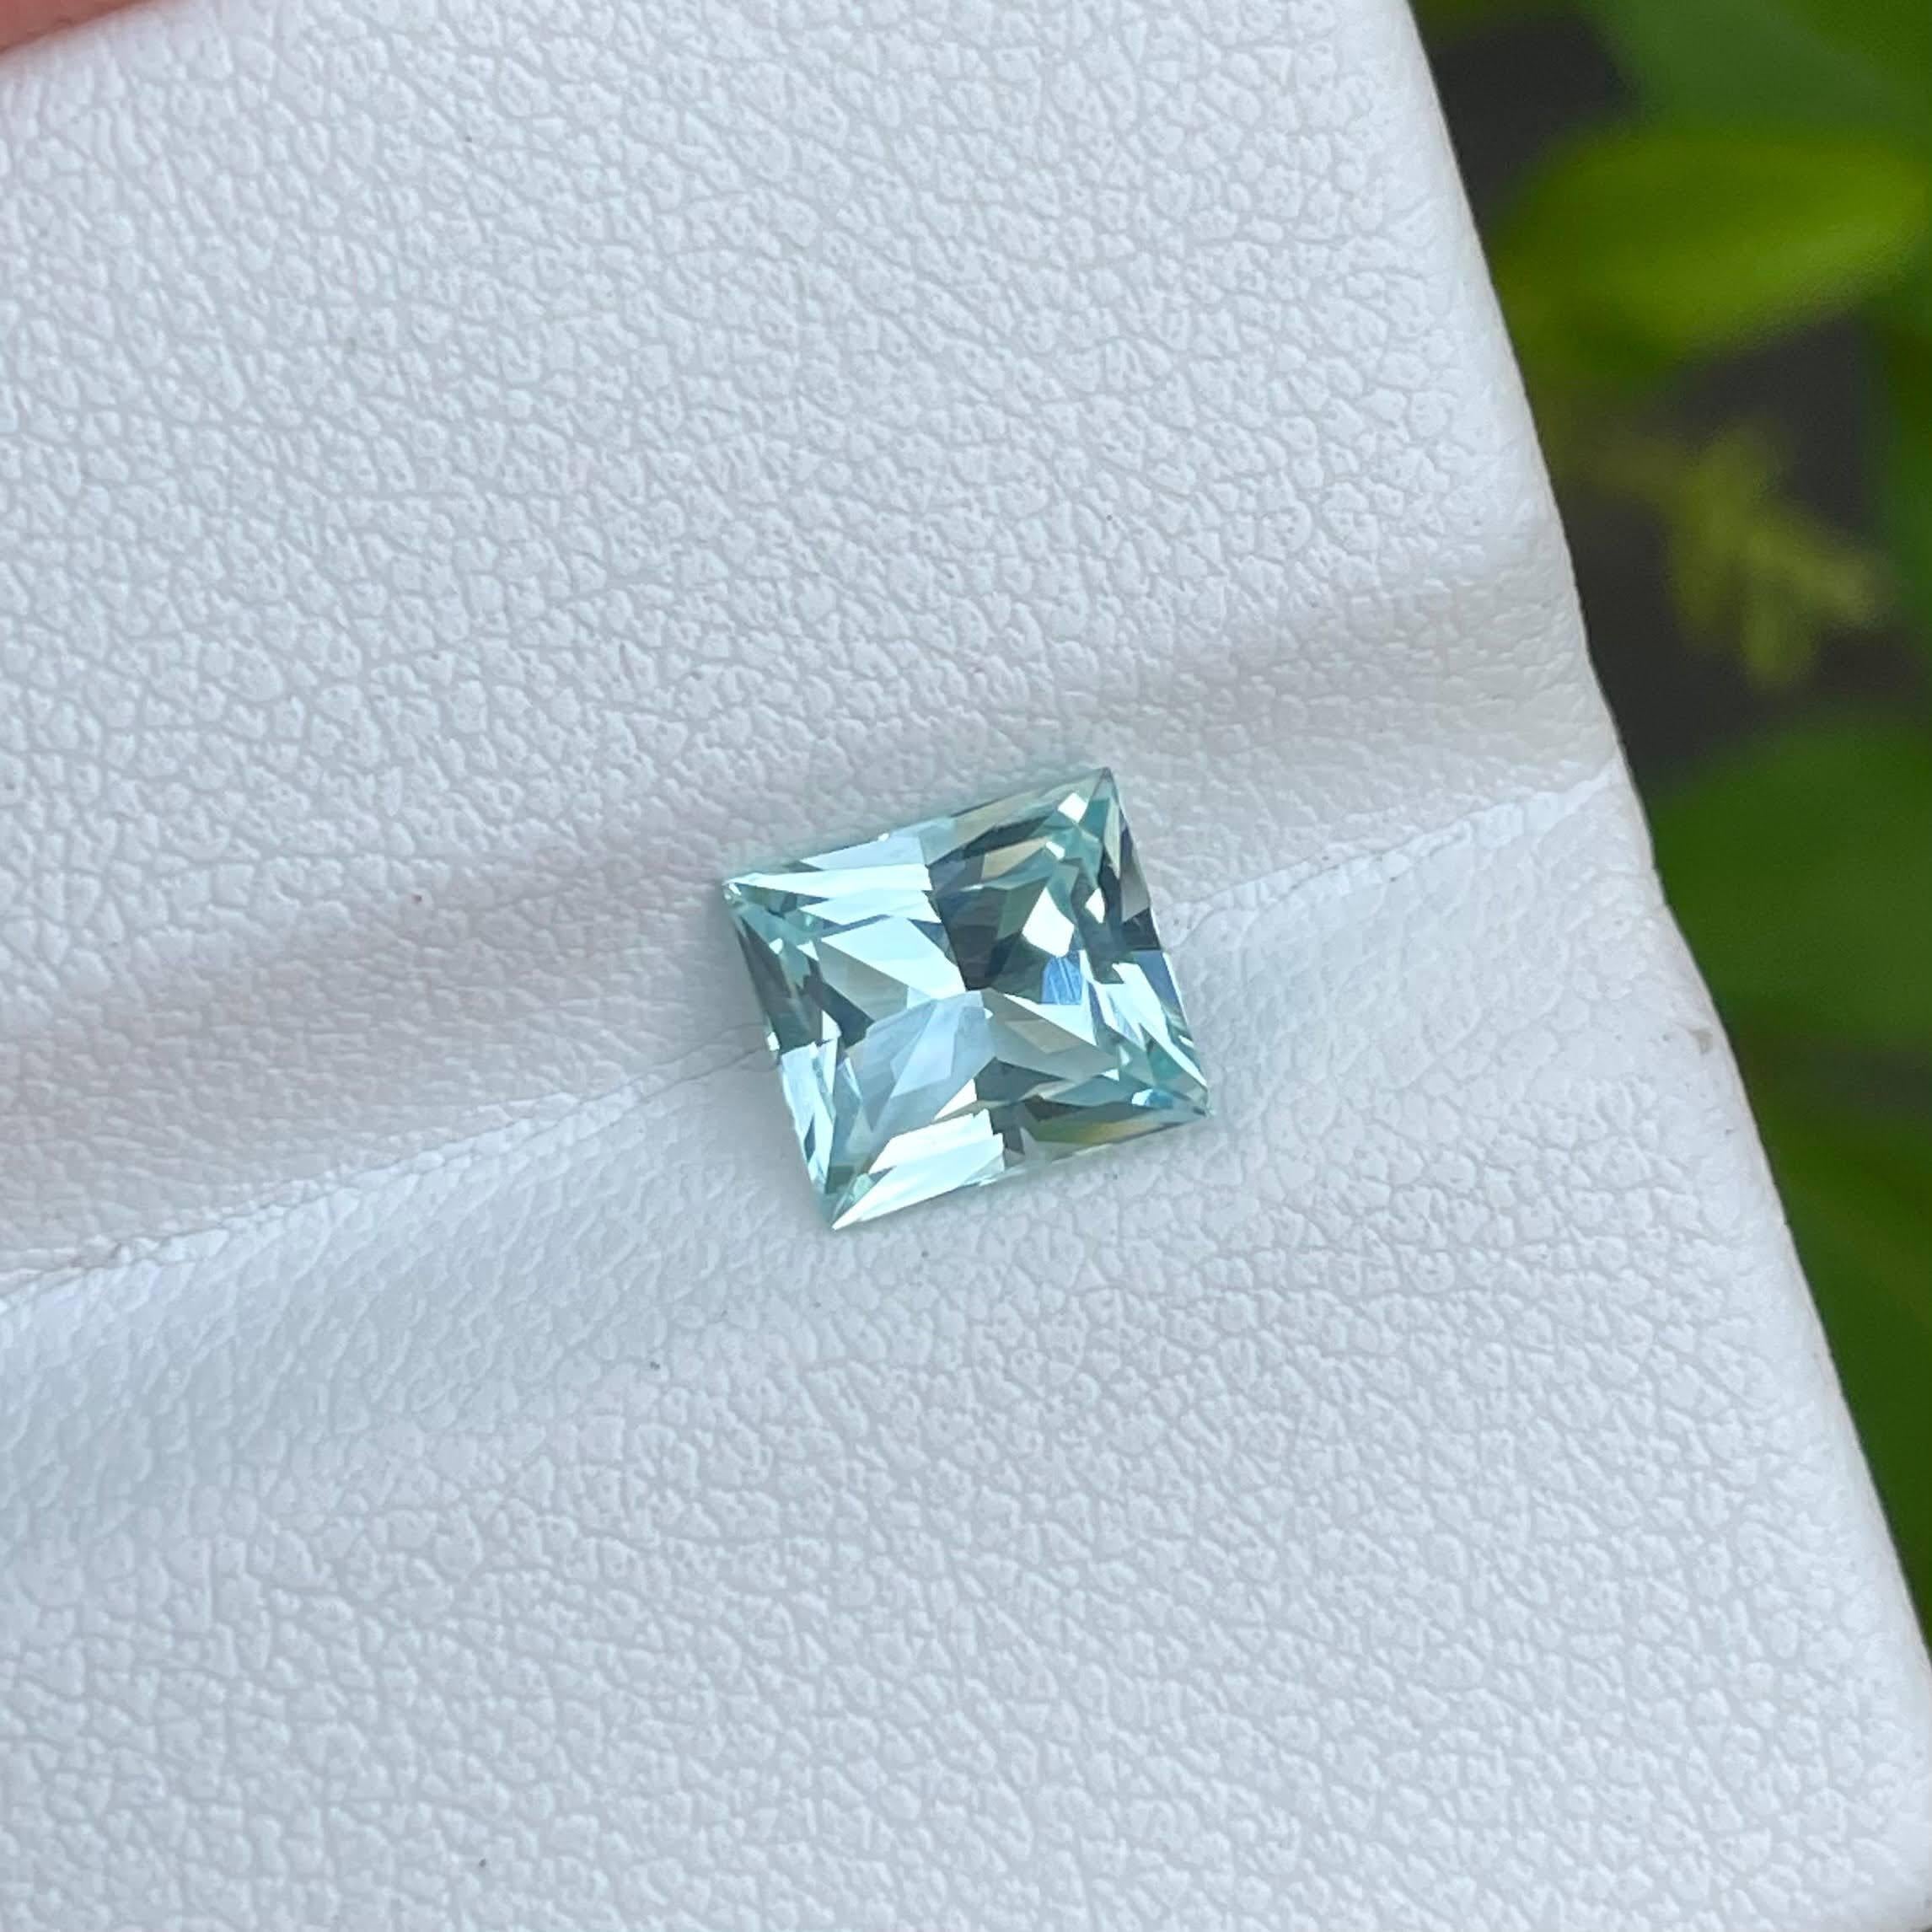 Weight 1.45 carats 
Dimensions 7.1x6.38x4.62 mm
Treatment none 
Origin Nigeria 
Clarity loupe clean 
Shape rectangular
Cut baguette 





A dazzling creation from the heart of Nigeria, this Sea Blue Aquamarine Stone is a true gemological